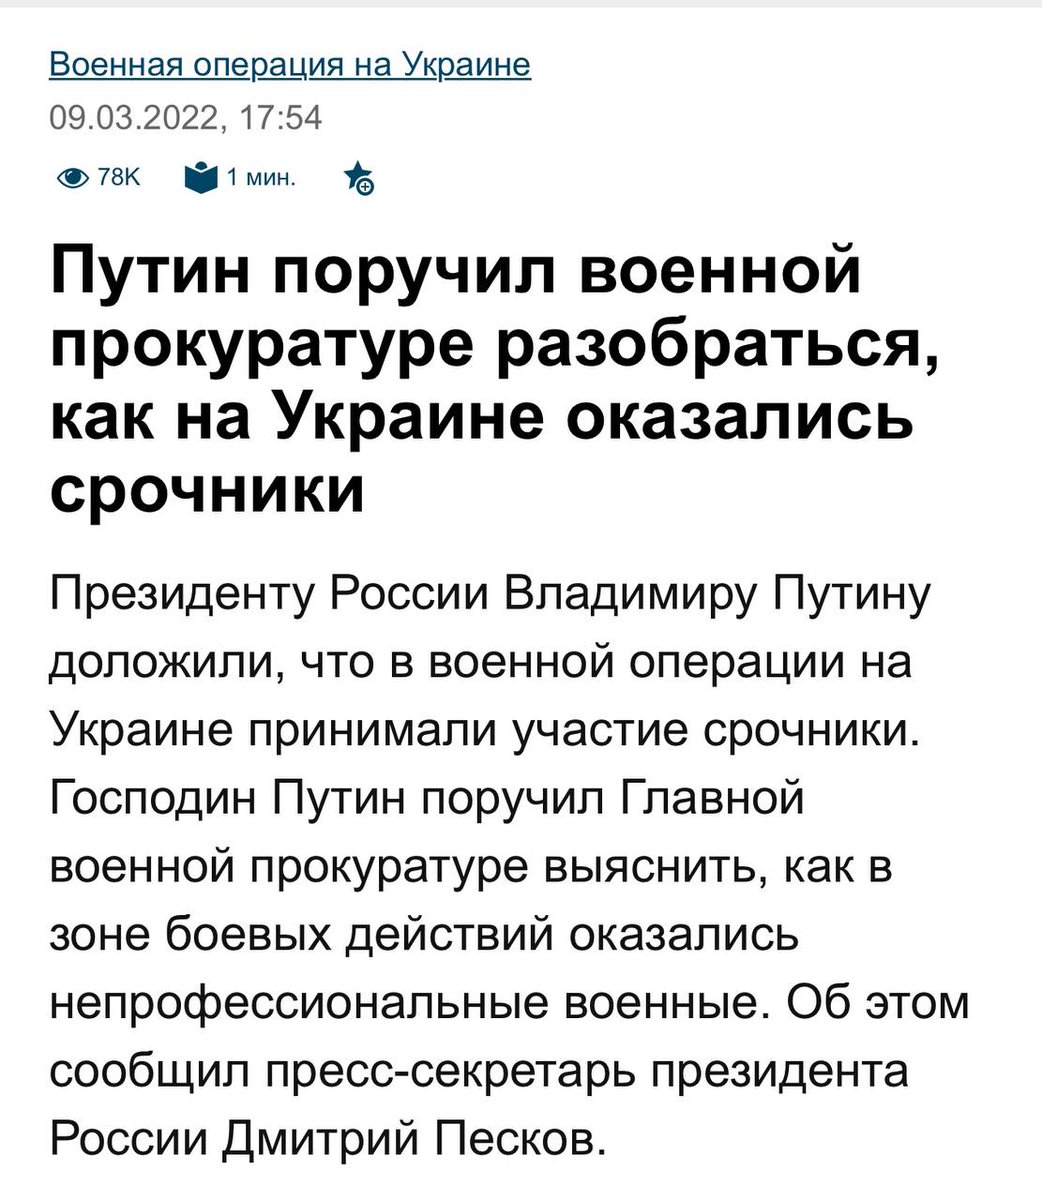 Situation with conscripts is a bit different. Technically sending conscripts to Ukraine is illegal. And yet, they did it ofc. Russian state basically admitted it, and Putin ordered the military prosecutors to "investigate the case". My prediction: no army boss will be punished